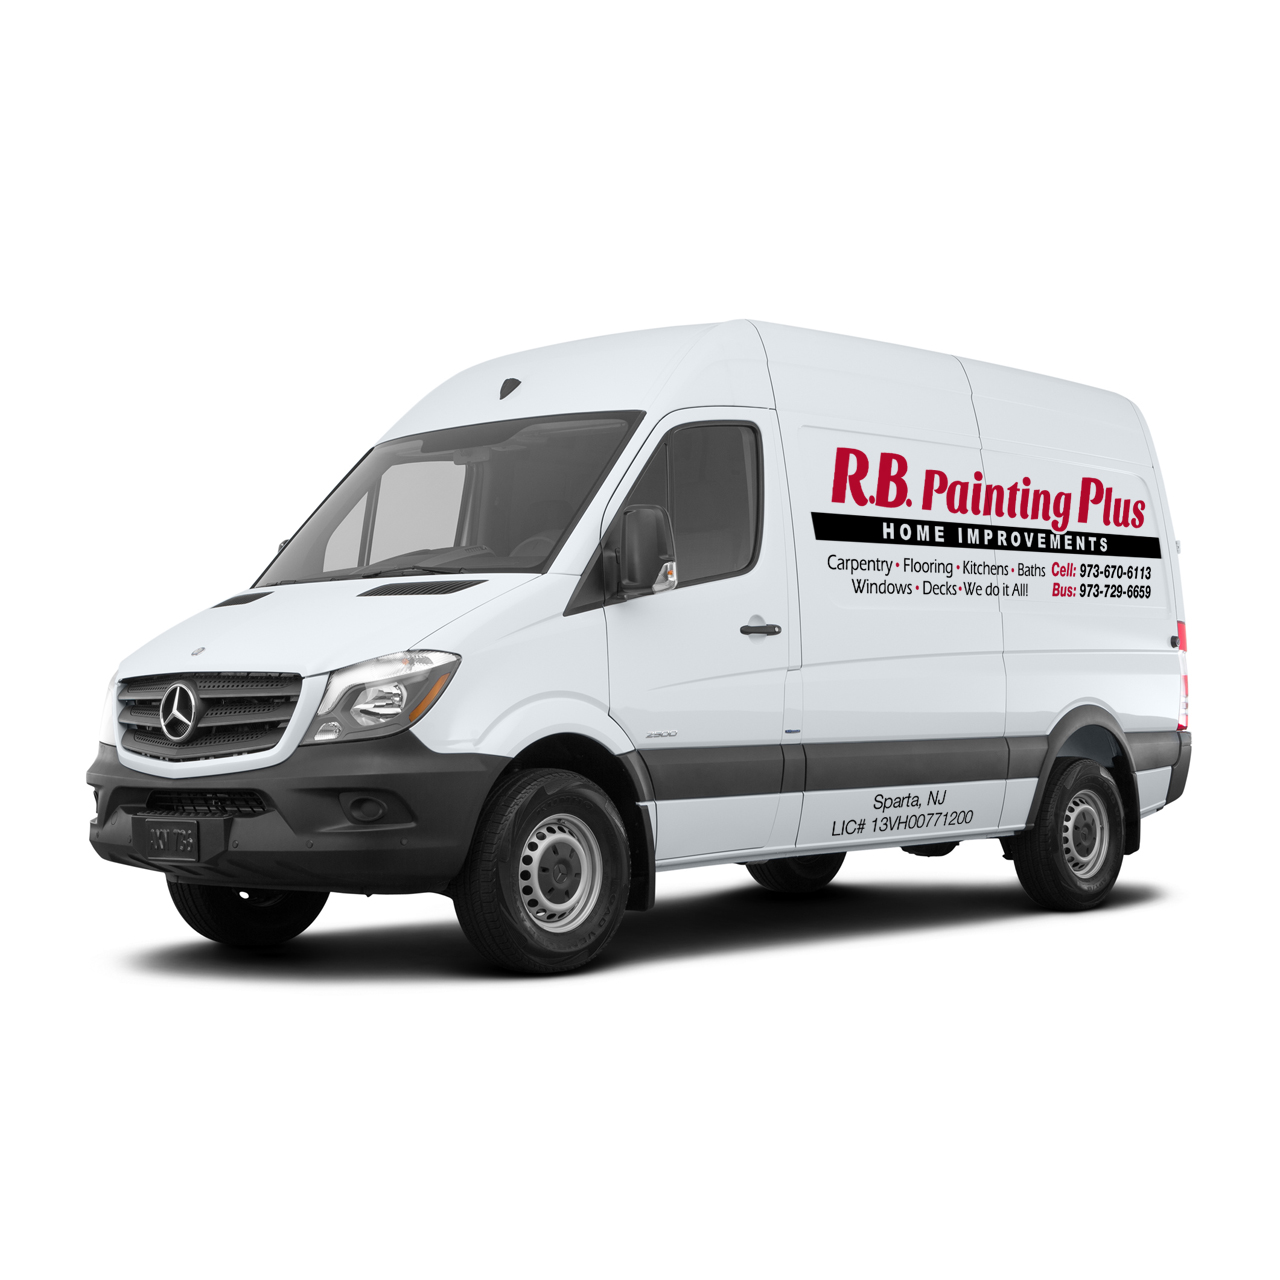 rb-painting-plus-truck